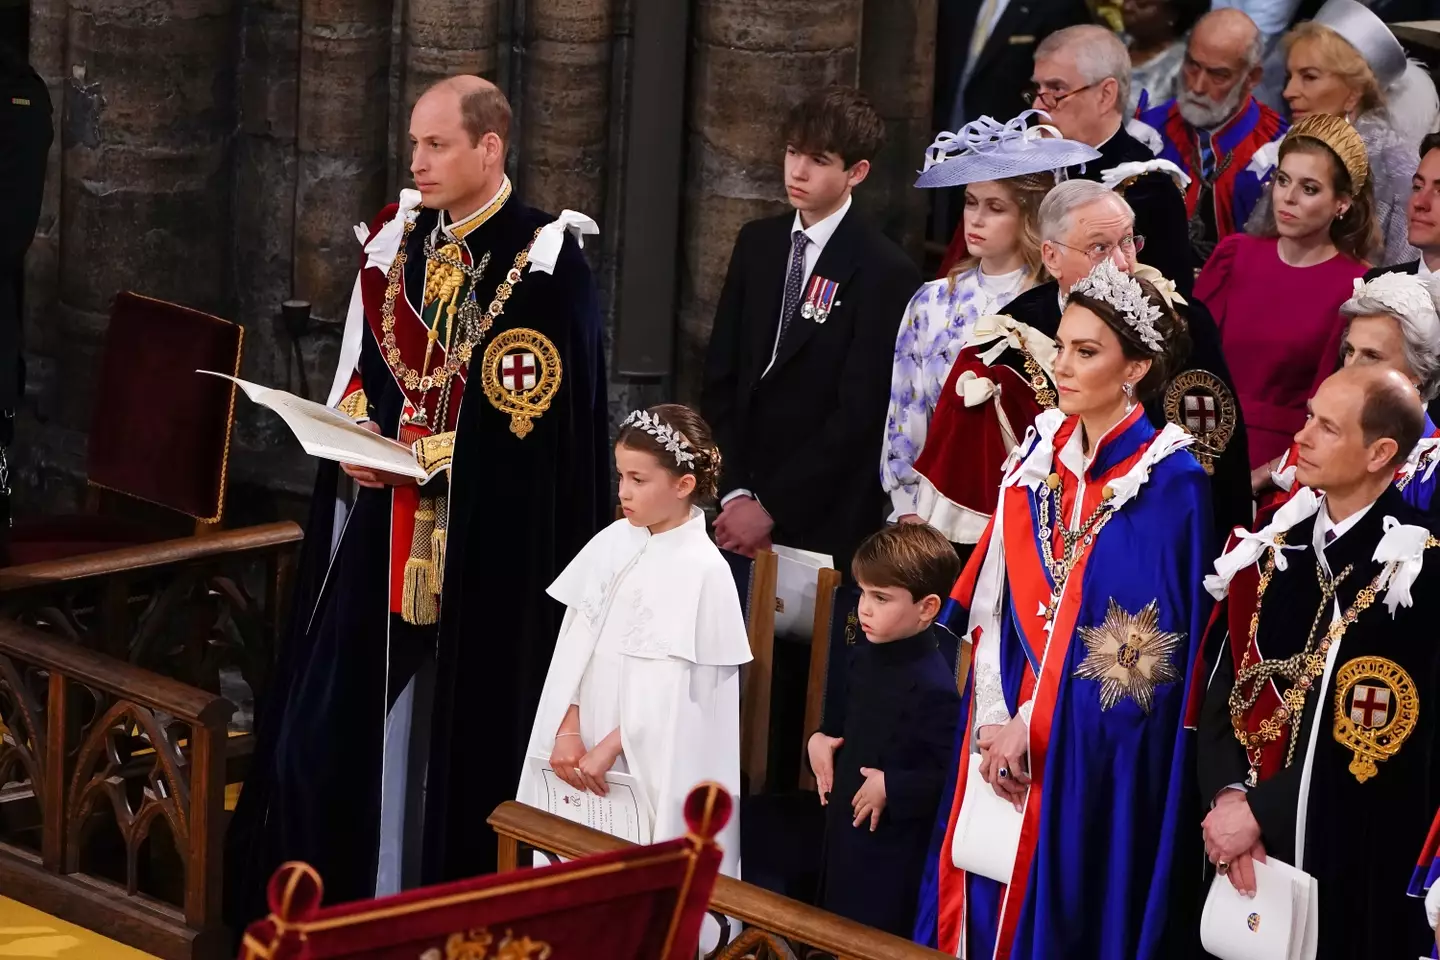 Kate Middleton sat in the front row for the coronation.